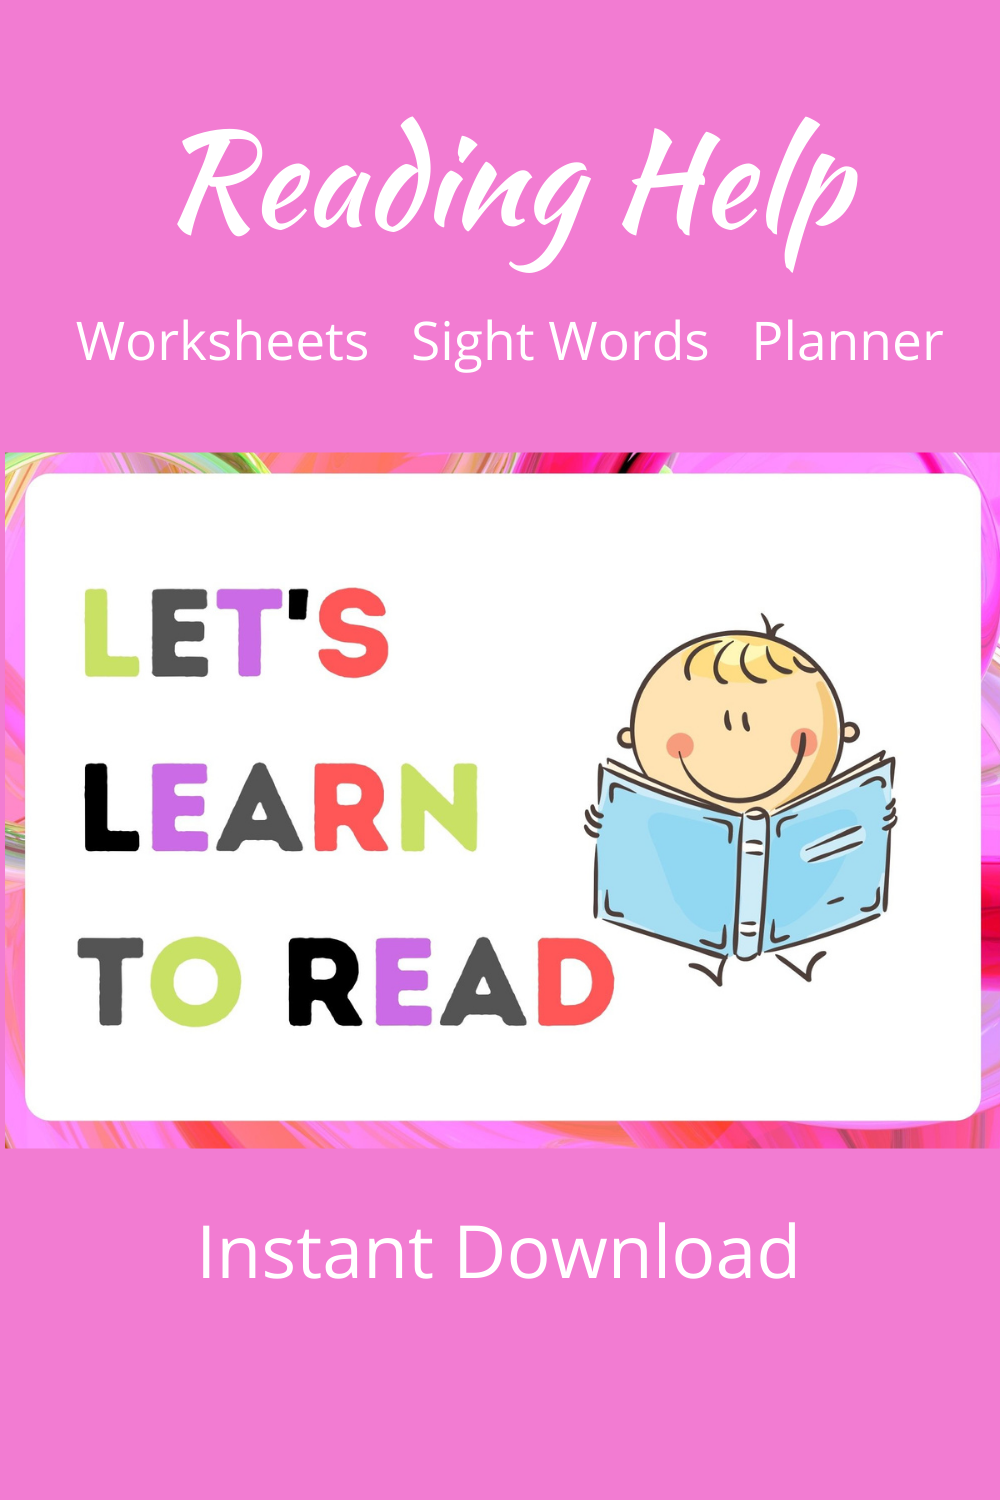 PreK through 2nd Grade Reading help at home.which includes instructions, worksheets, sightwords through 3rd grade and a planner